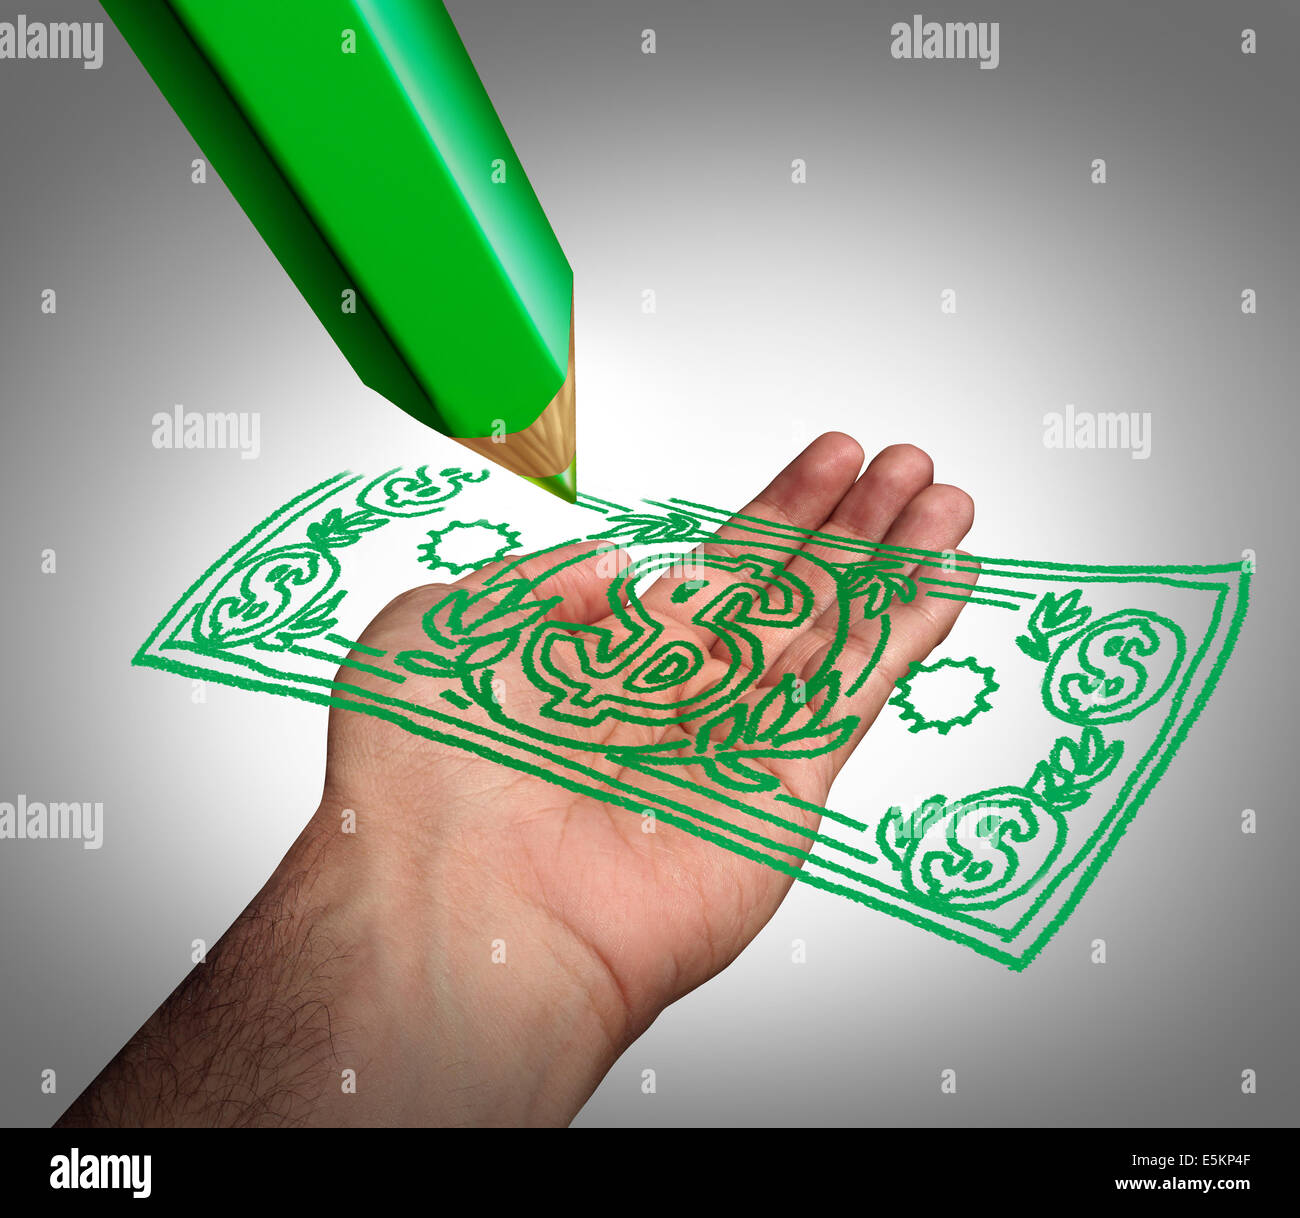 Making money business concept as a green pencil drawing a dollar currency on an open hand as a symbol of creating wealth or government subsidies for lobby groups or payment of a refund. Stock Photo